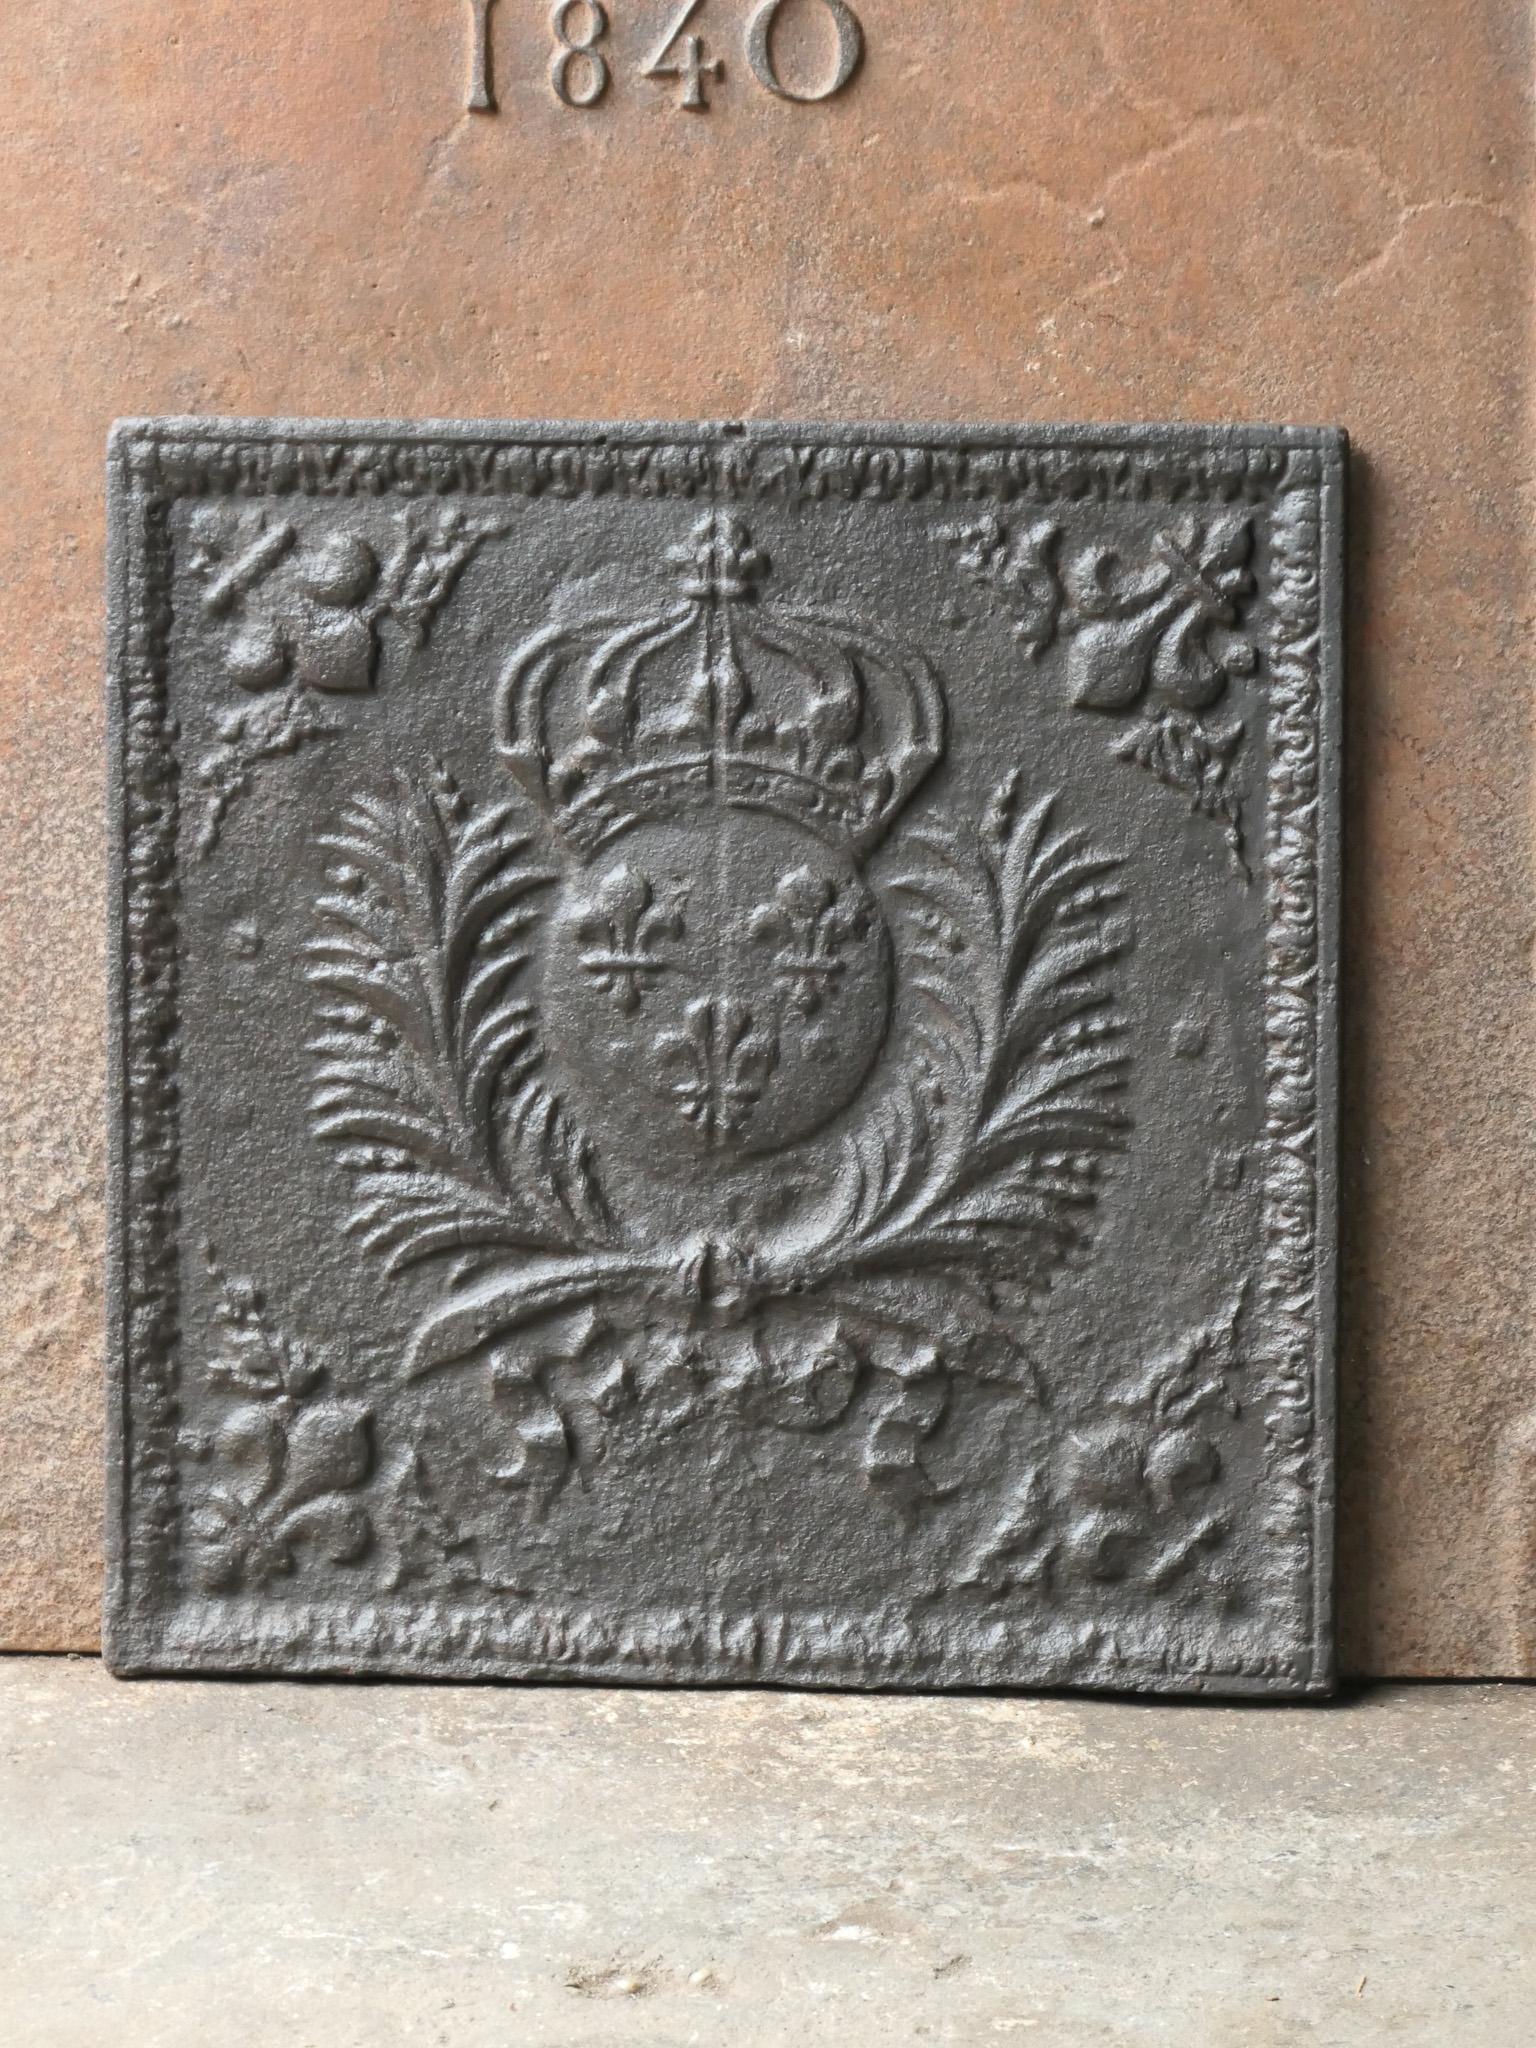 17th - 18th century French Louis XIV period fireback with the Arms of France. A coat of arms of the House of Bourbon, an originally French royal house that became a major dynasty in Europe. The house delivered kings for Spain (Navarra), France, both